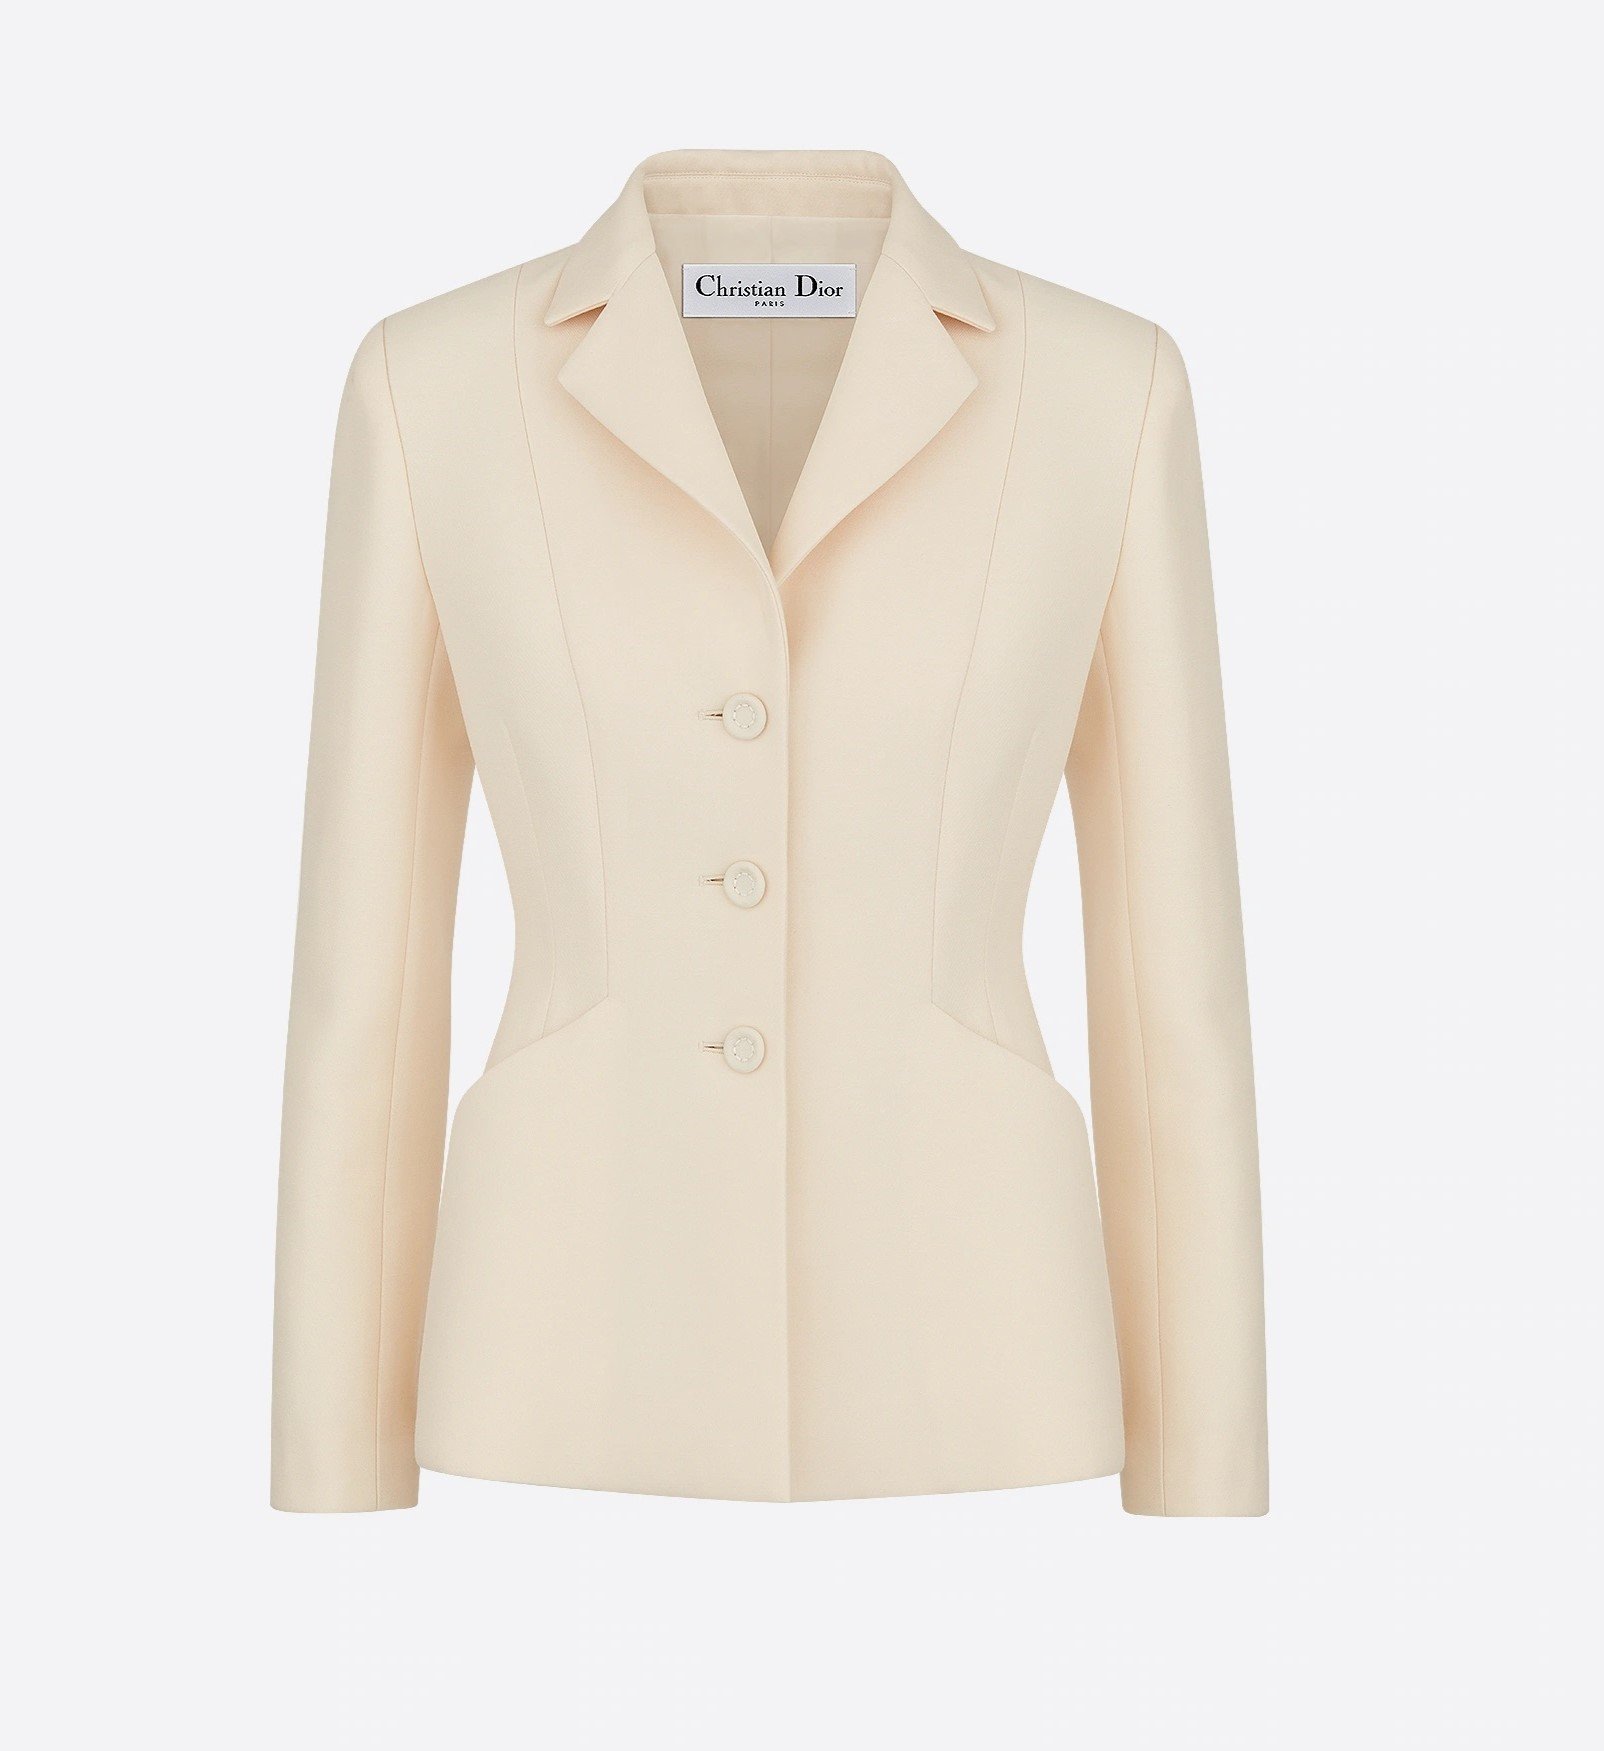 Christian Dior 30 Montaigne Single-Breasted  Bar Jacket in White Wool and Silk.jpg